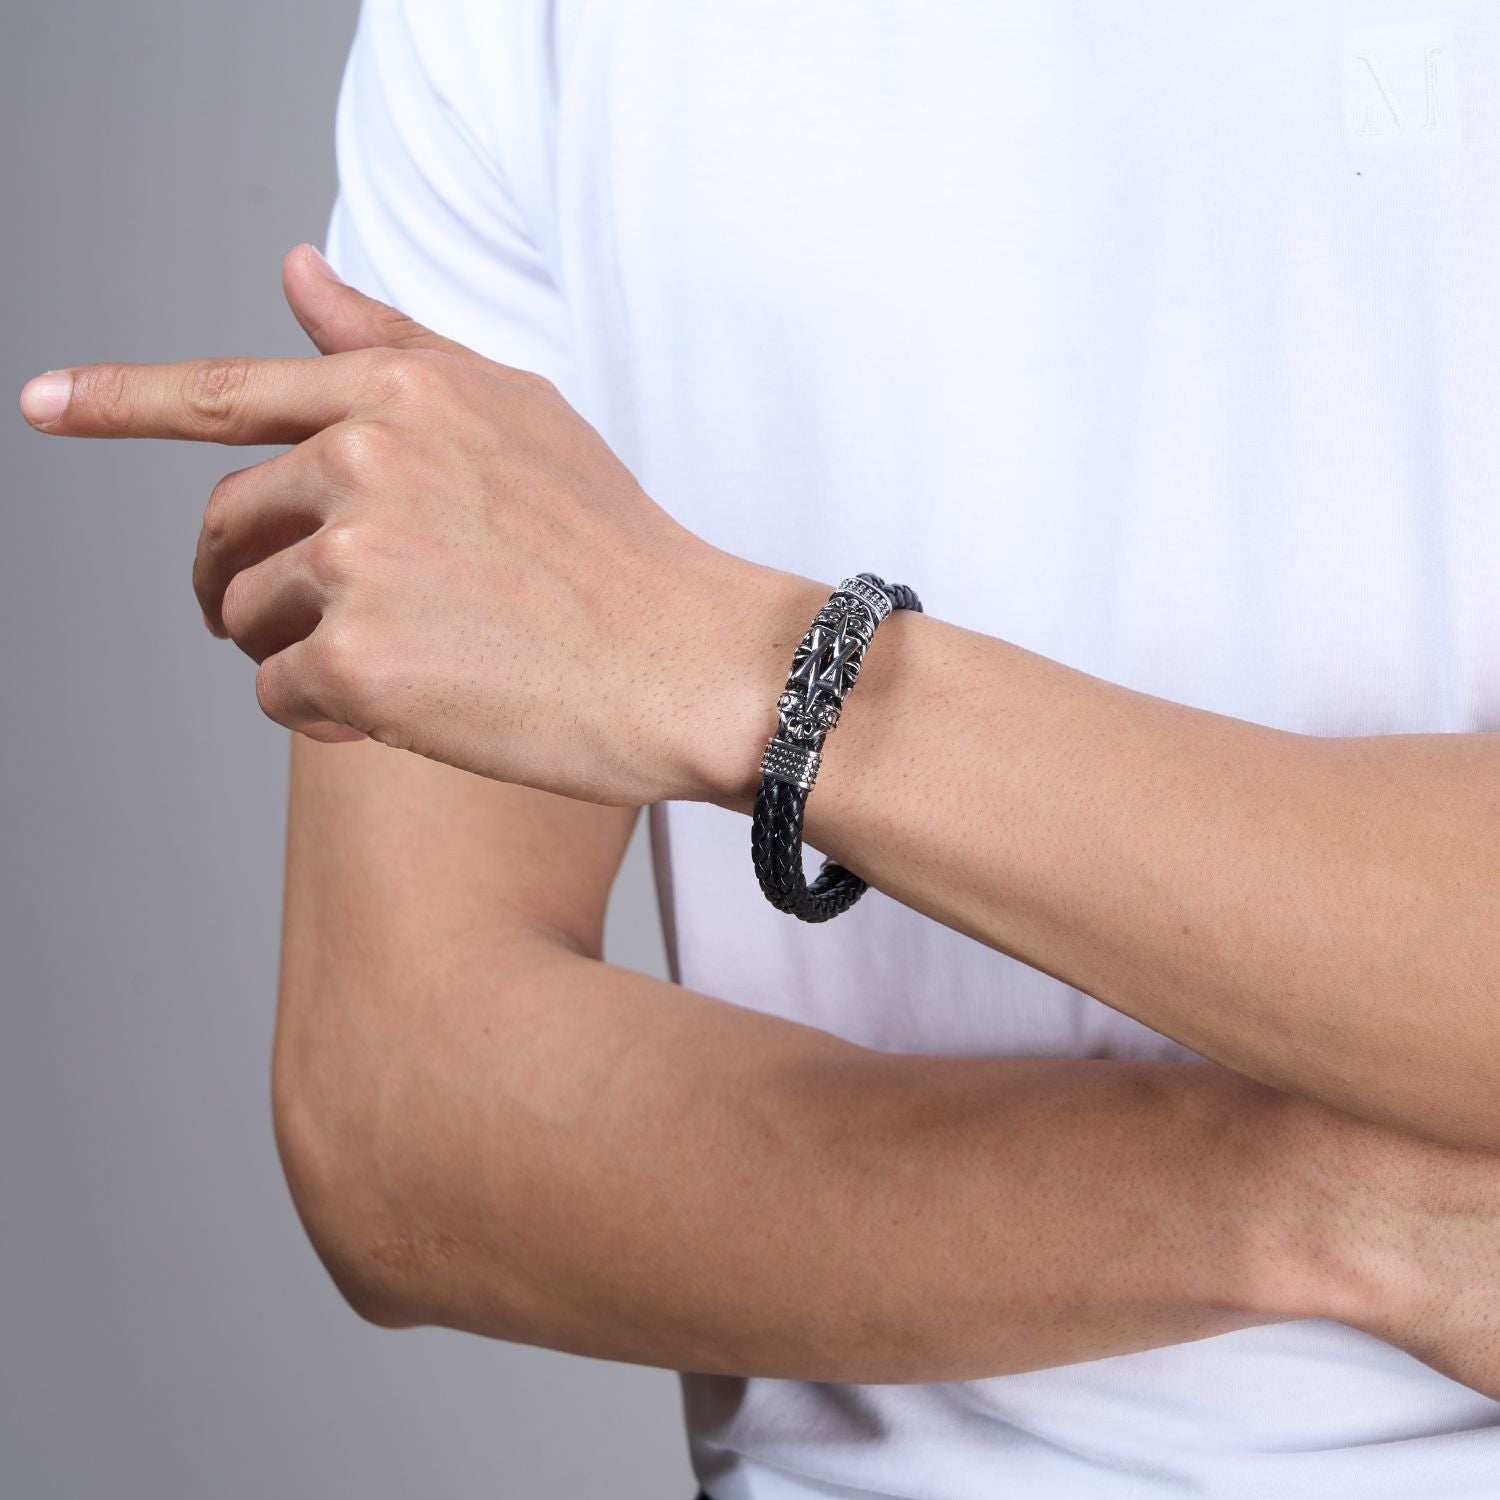 Display of Black and Silver colored Bracelet for men with magnetic clasp on a hand.